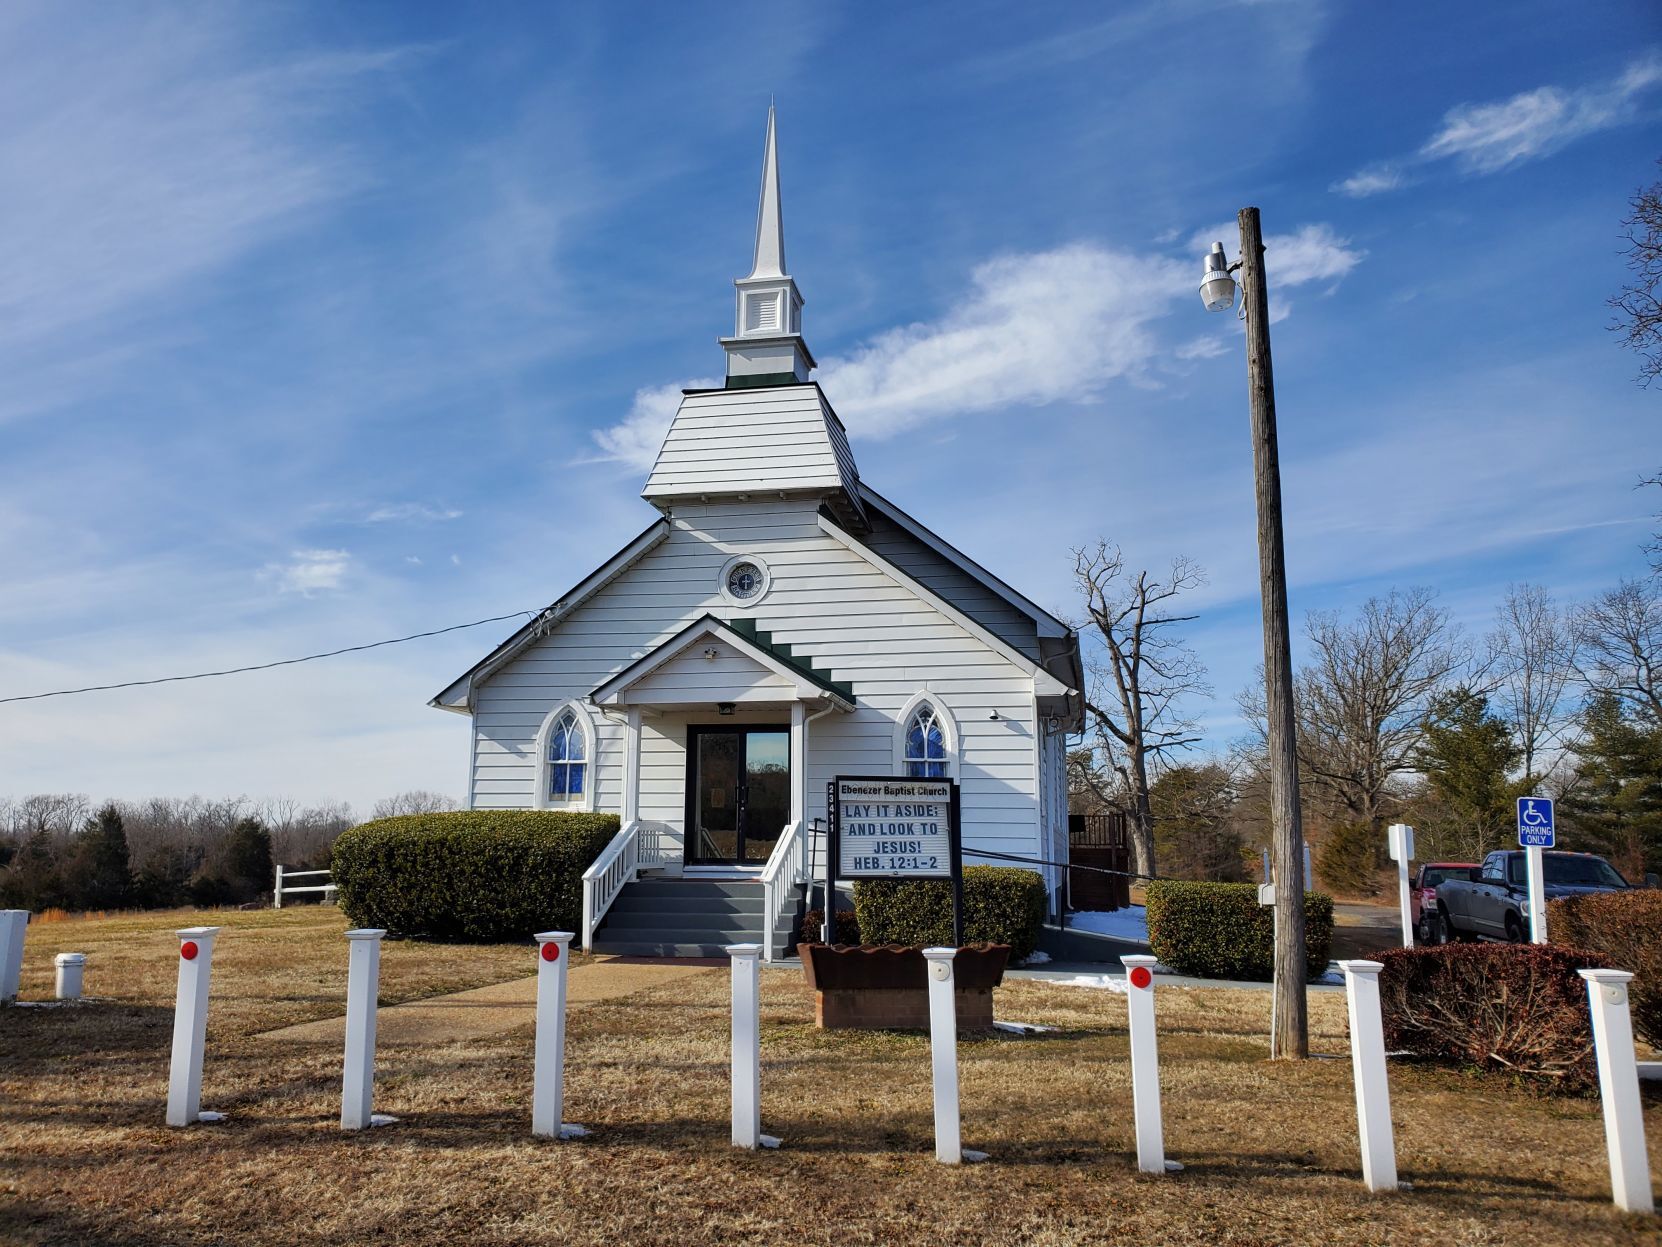 Church news for March 19, 2021